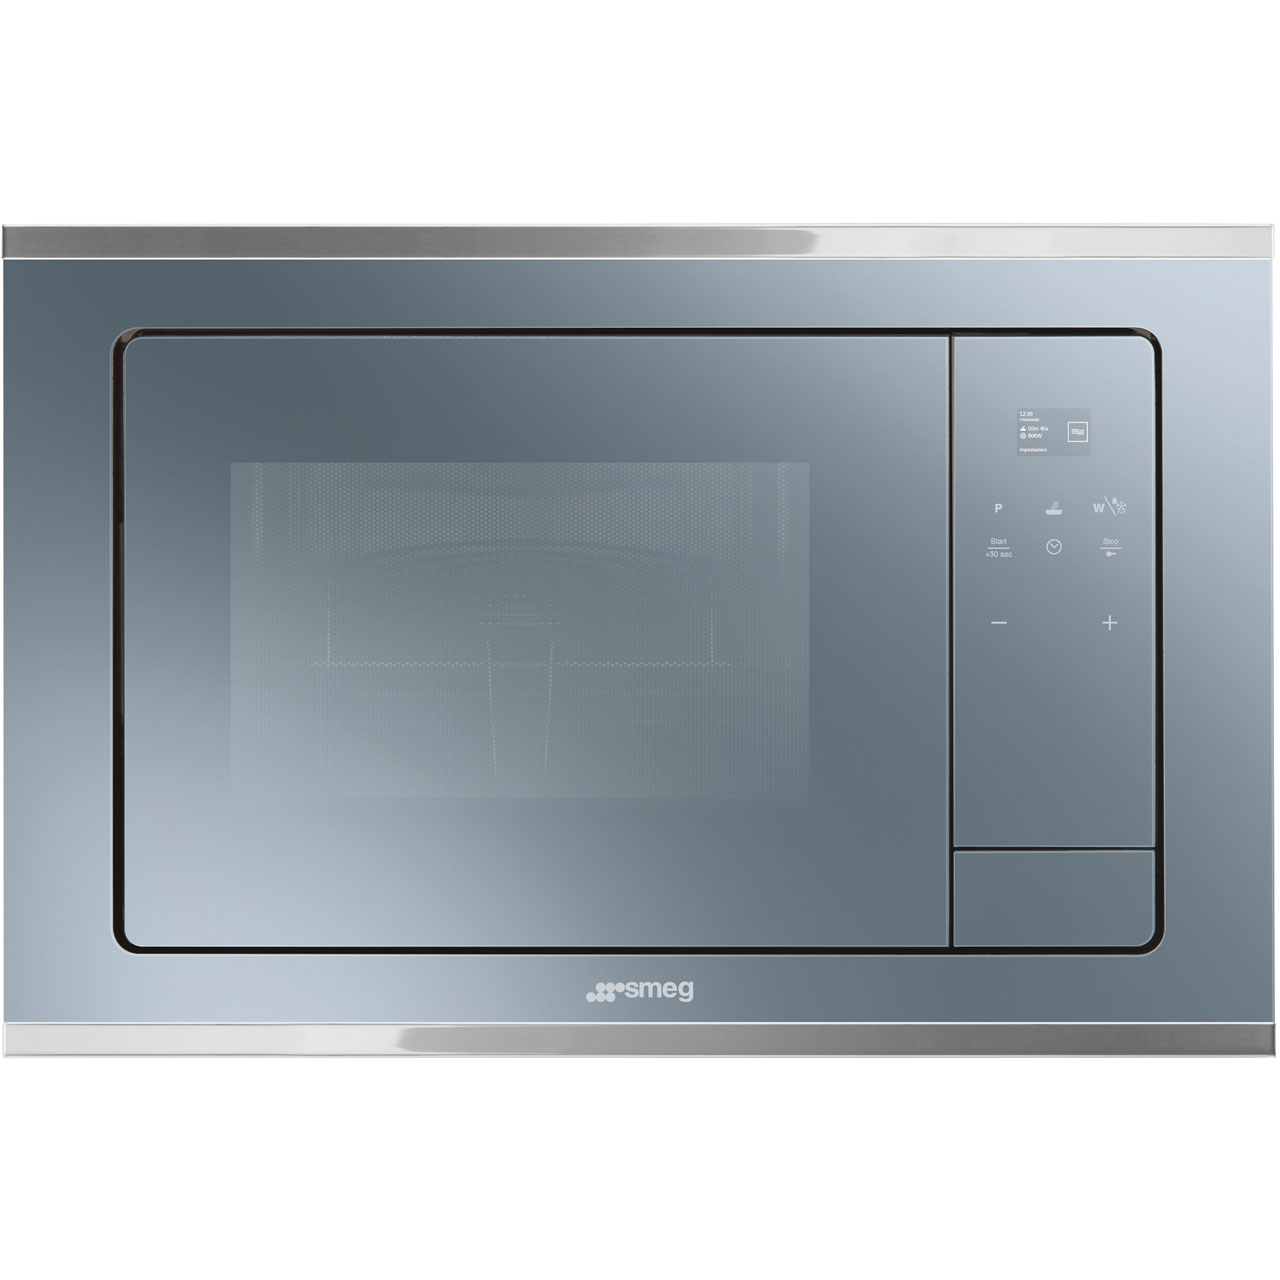 Smeg Cucina FMI420S Built In Microwave with Grill Review